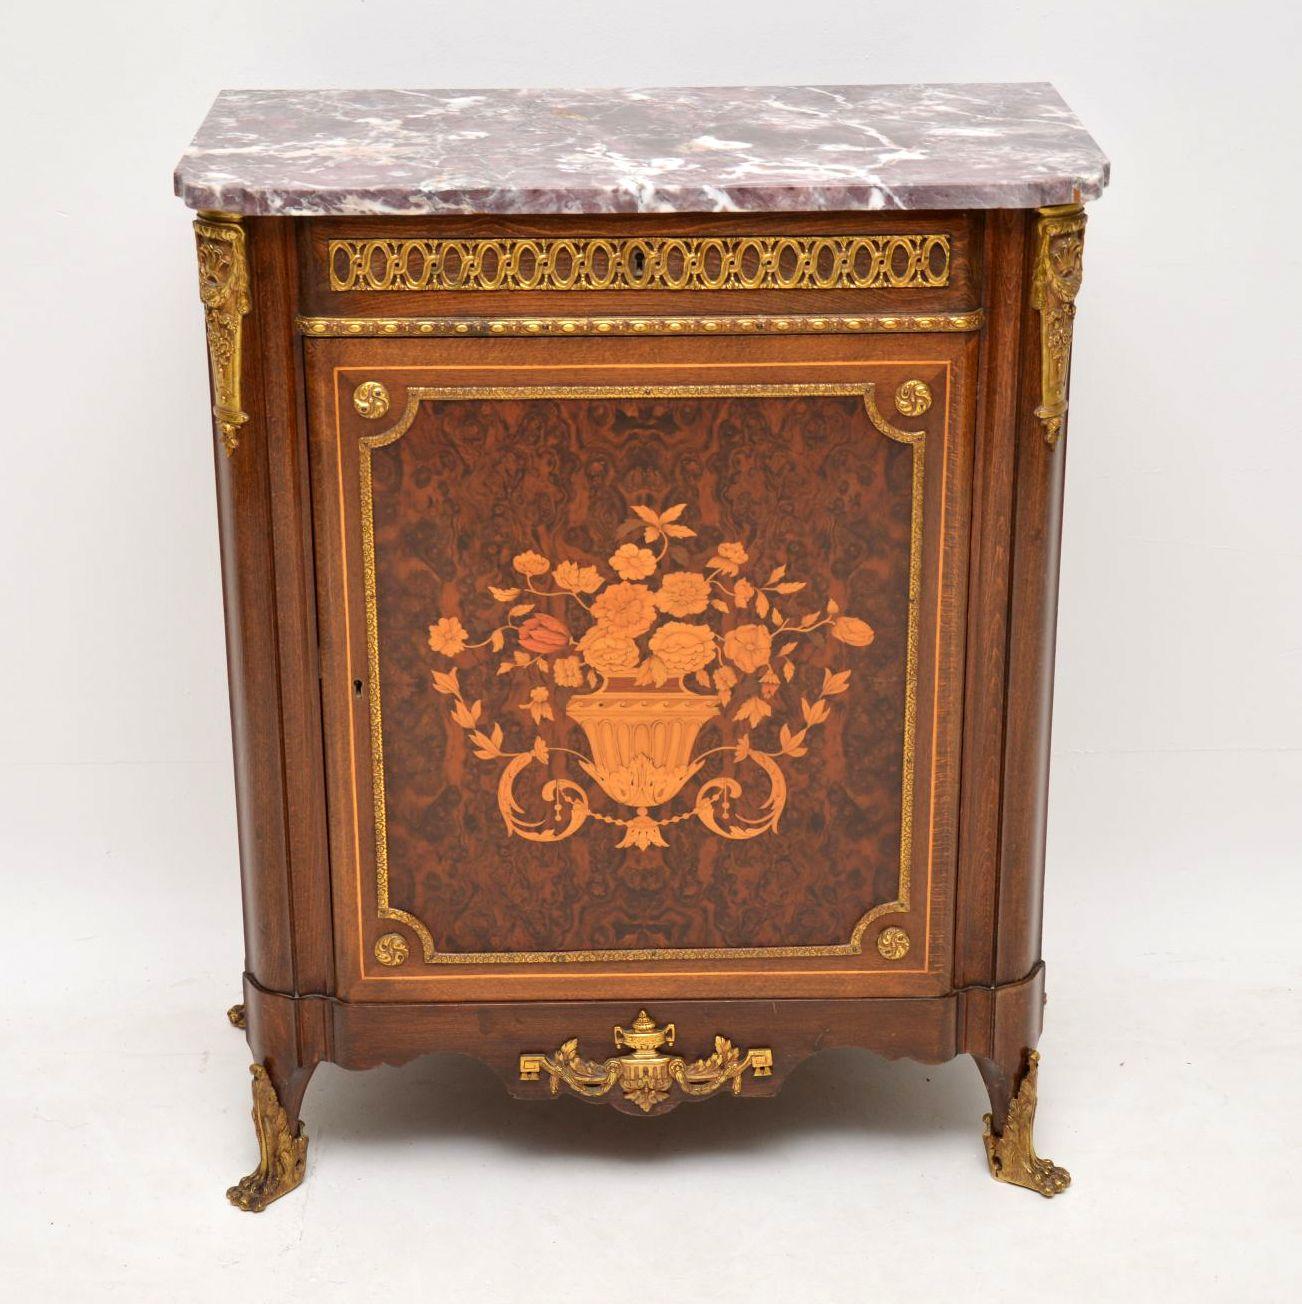 This antique French marble-top cabinet is wonderful quality and has nice small proportions. The marble top is very colorful and perfect. The floors marquetry on the door is absolutely stunning with amazing details and it’s set on a tight burr walnut